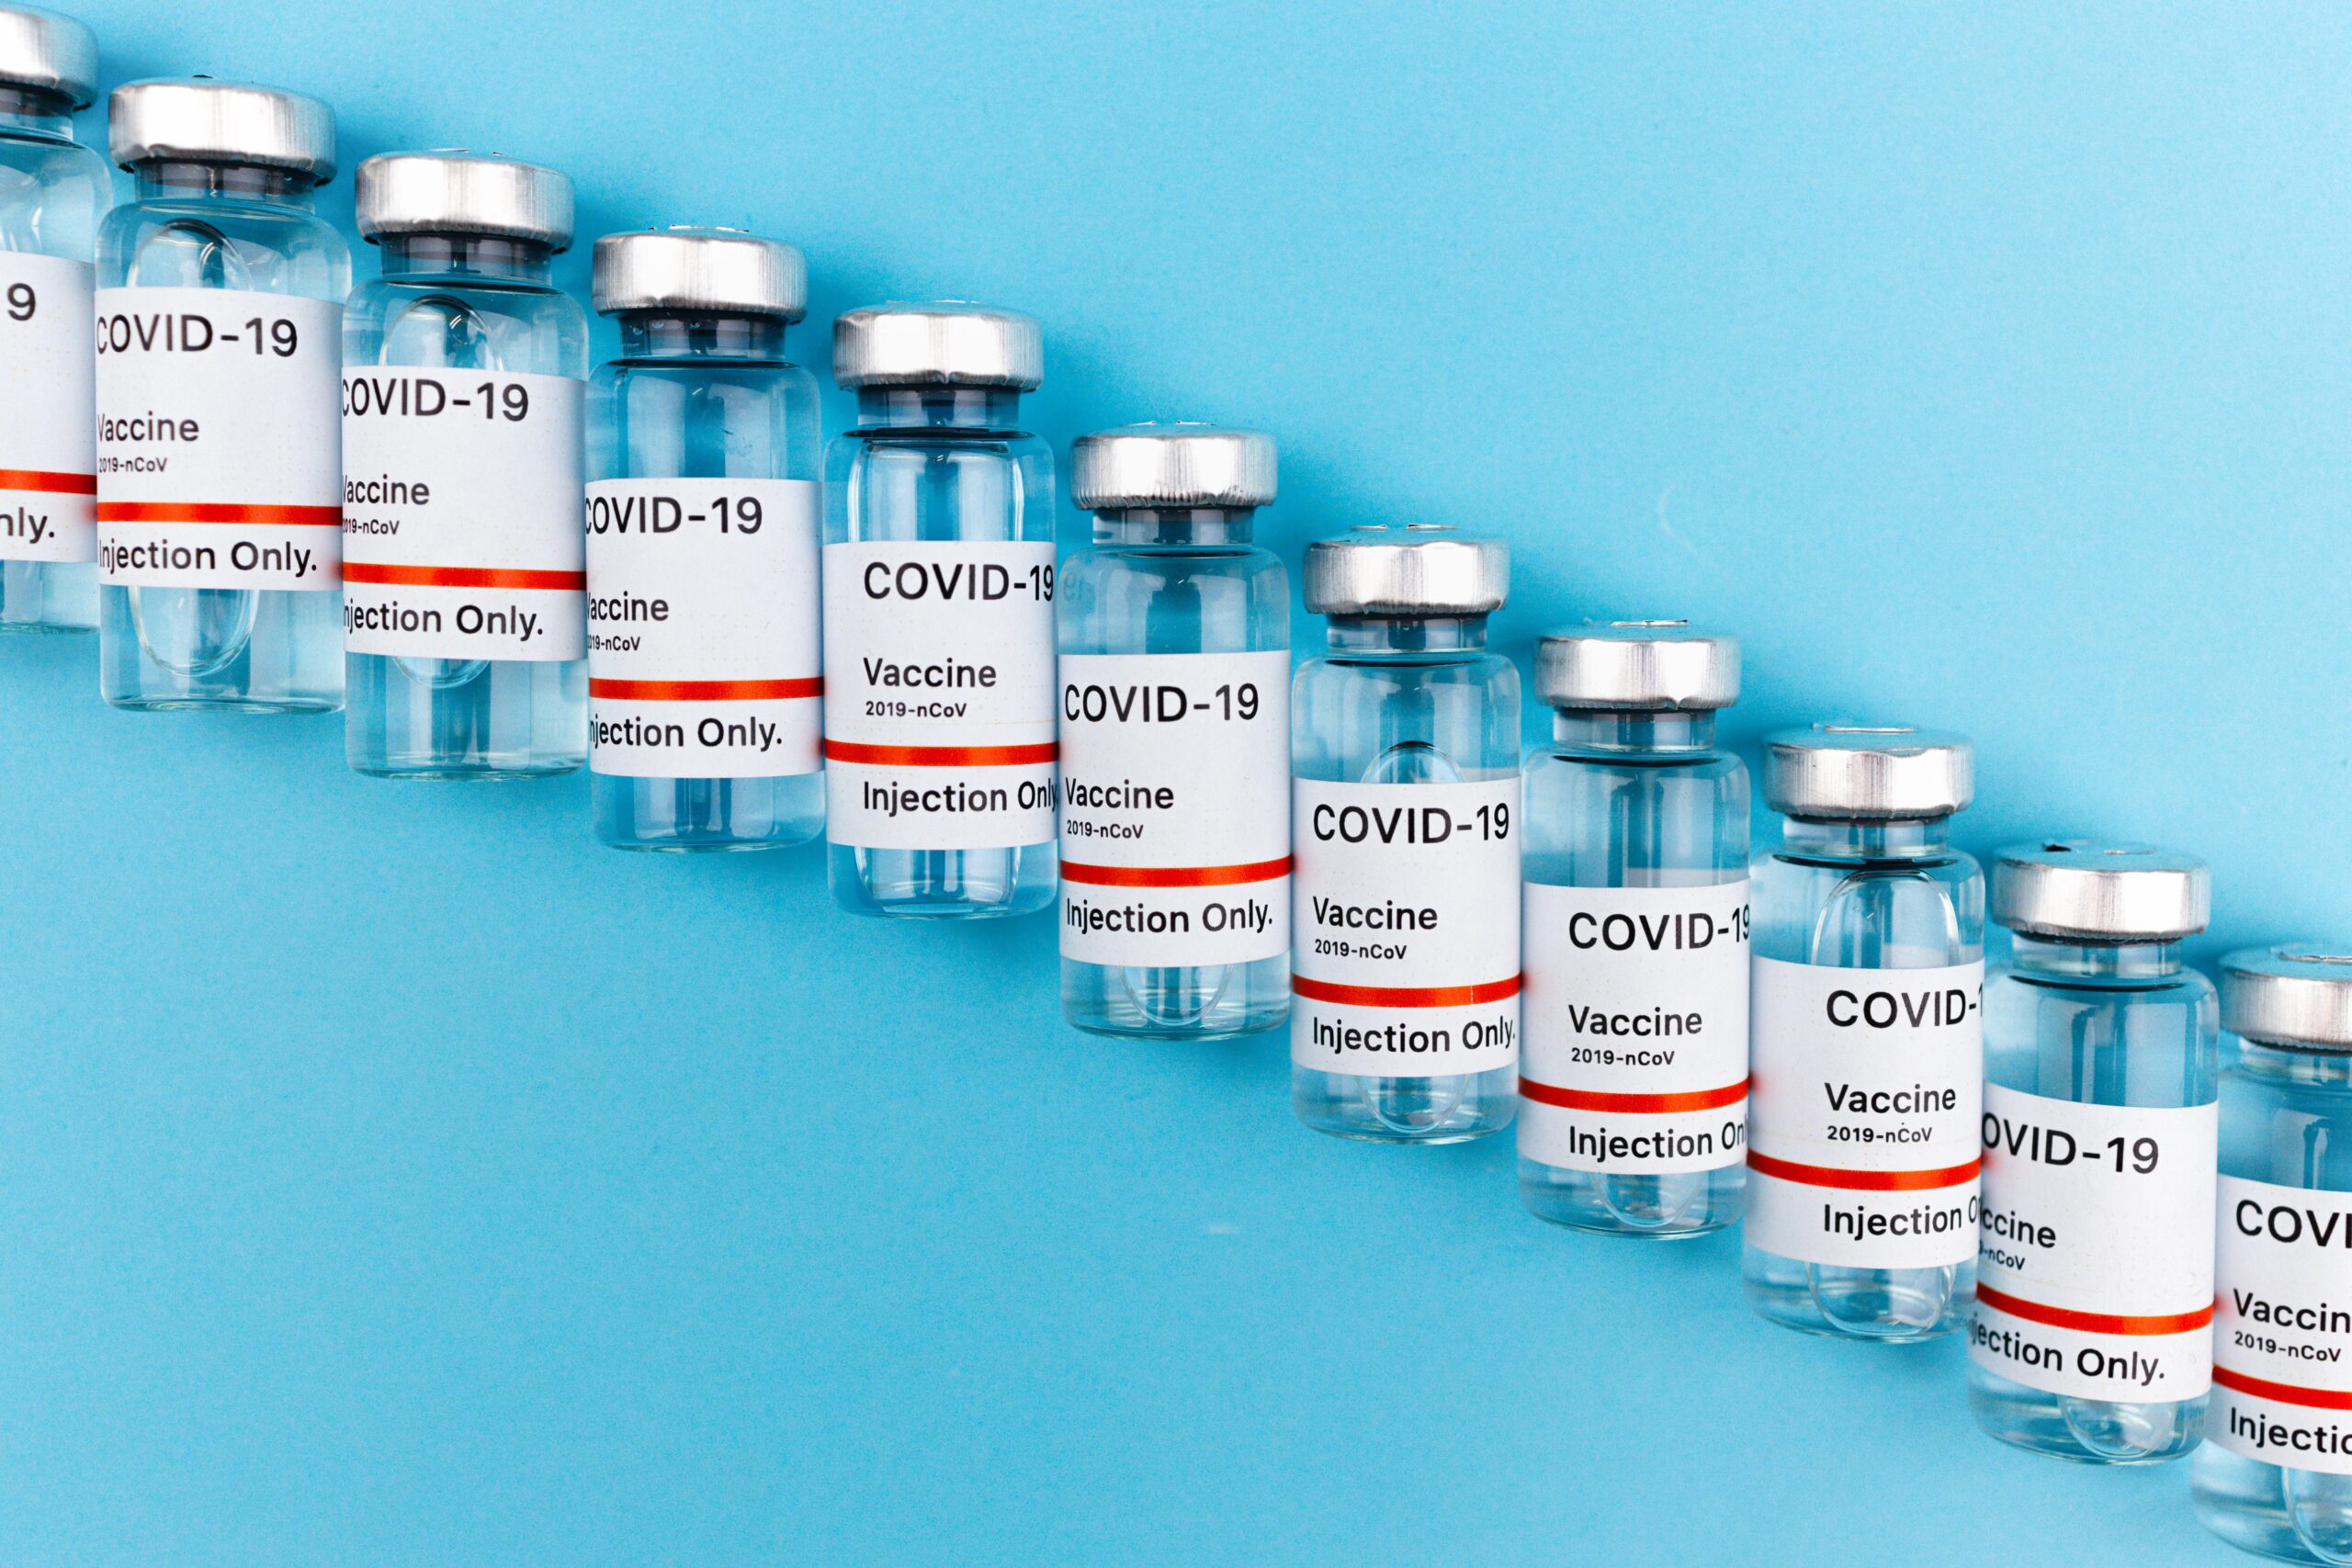 If you’re unsure about getting the COVID-19 vaccine, read this thumbnail